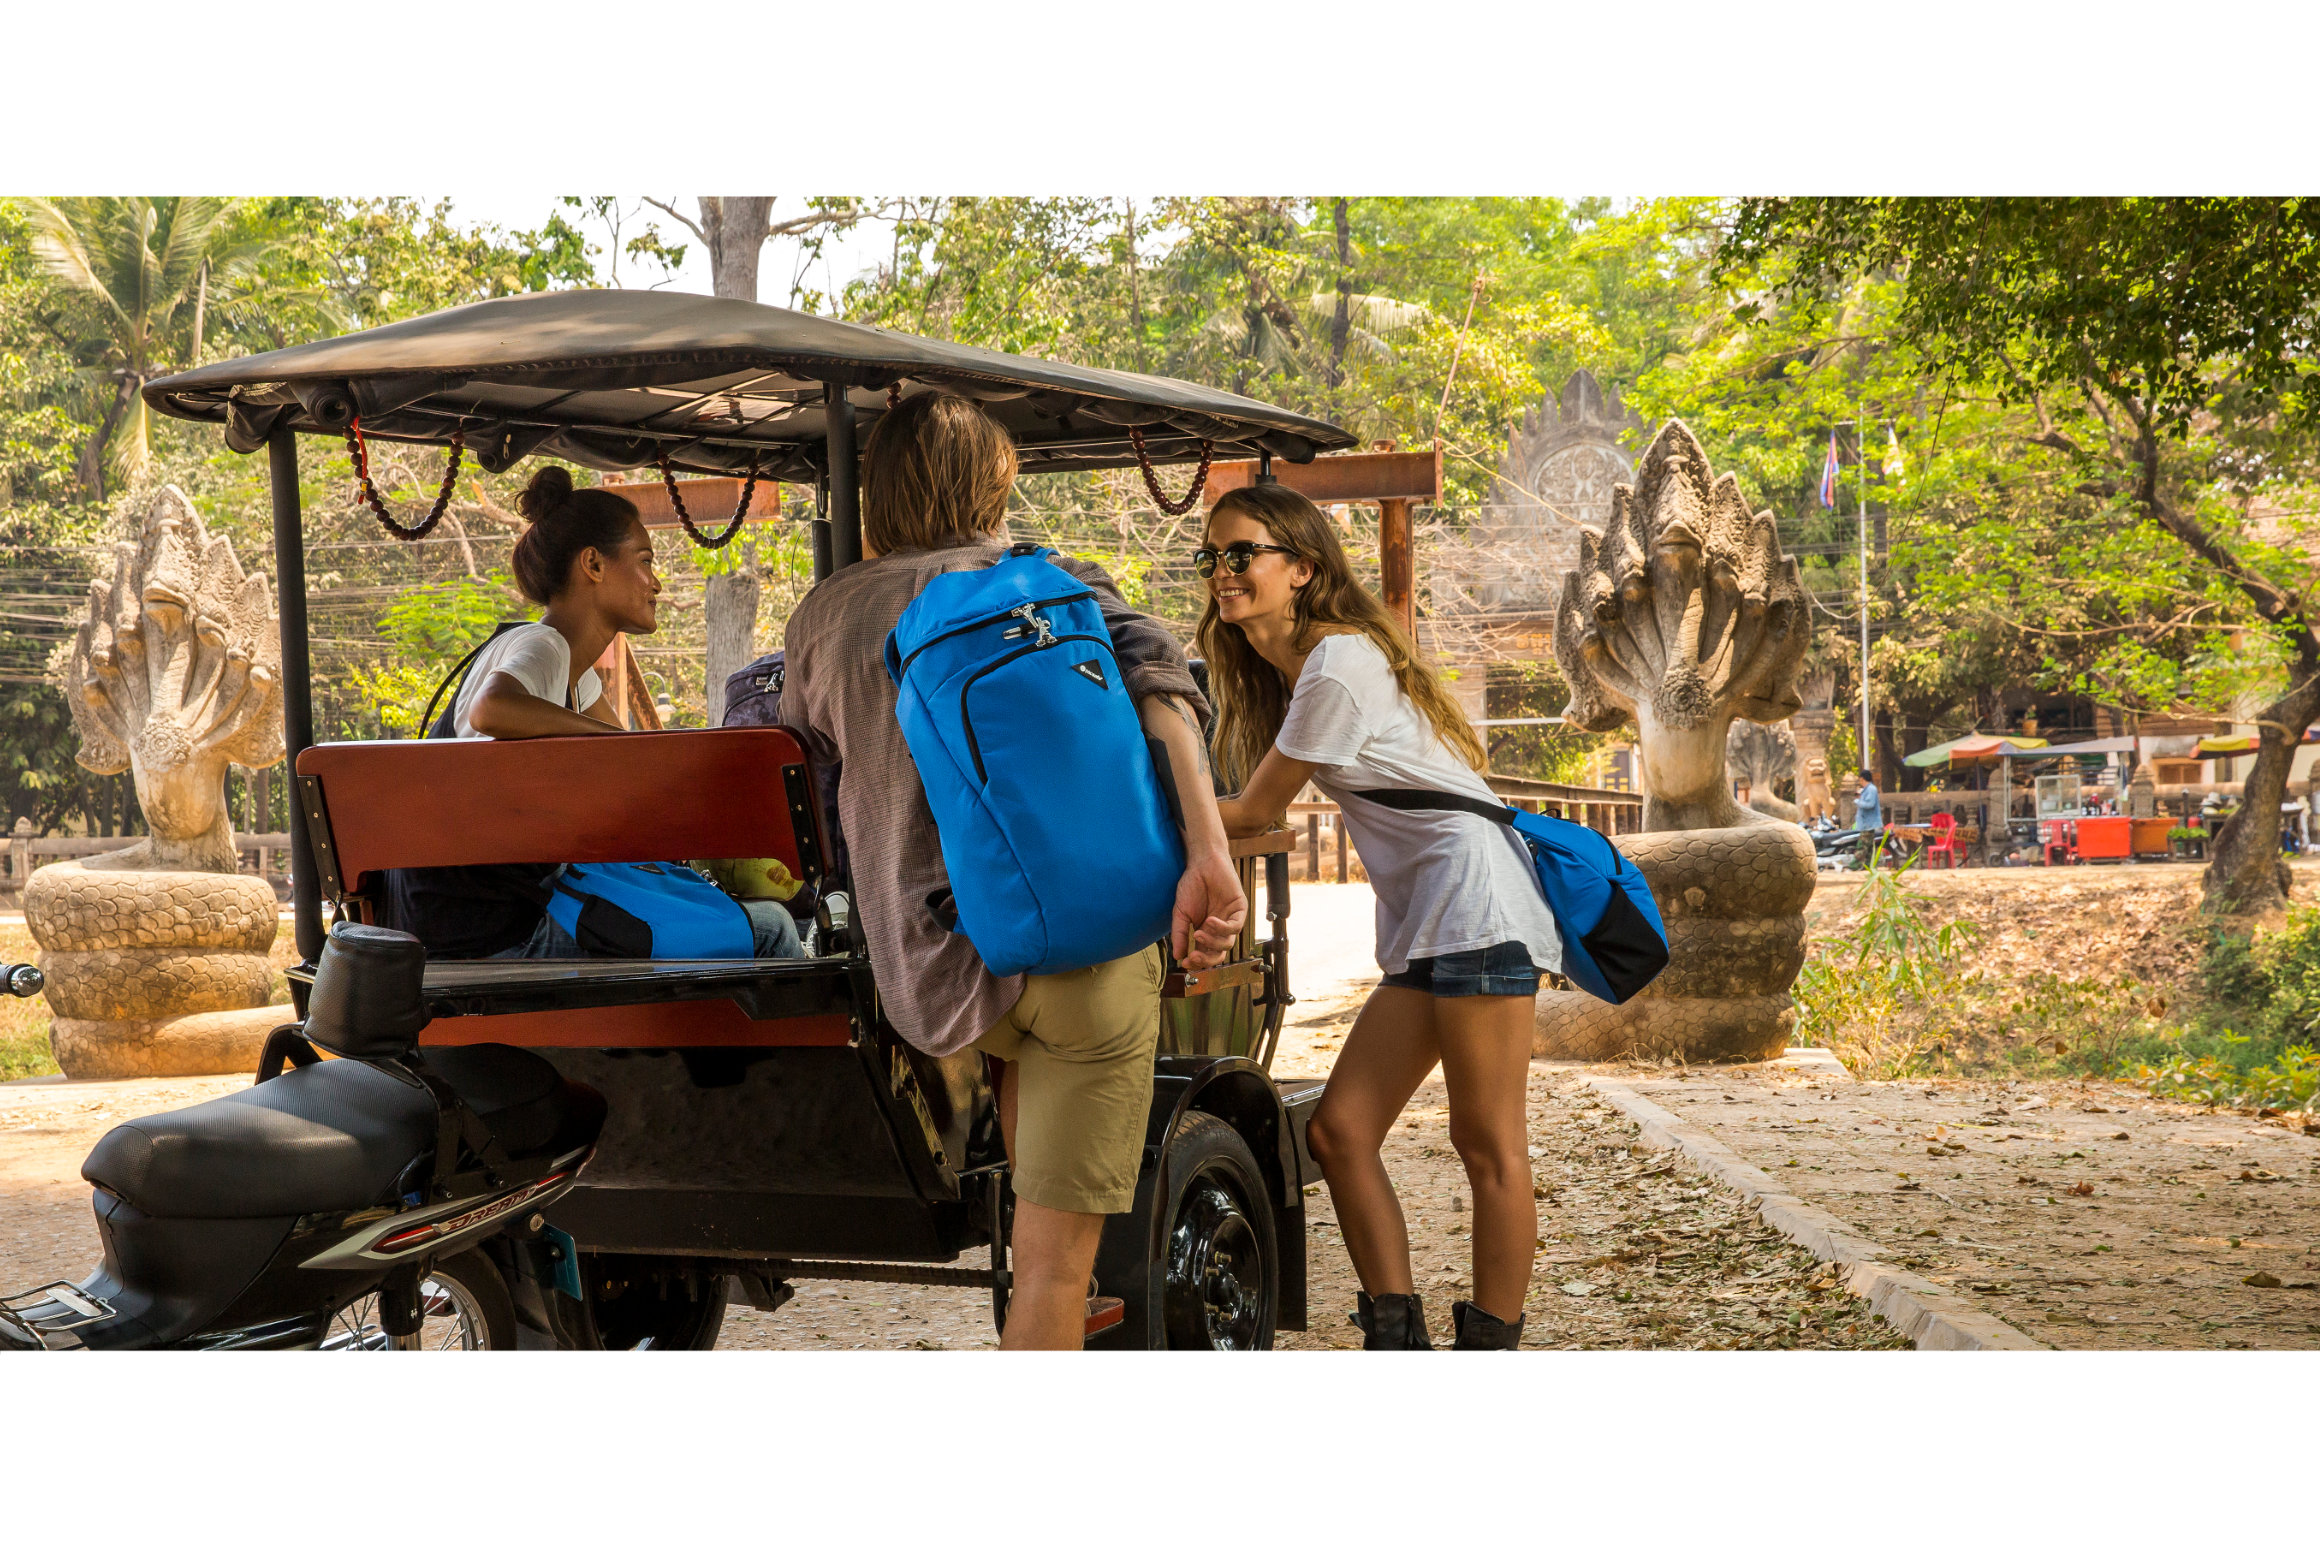 Flashpackers and Pacsafe bags - Siem Reap, Cambodia